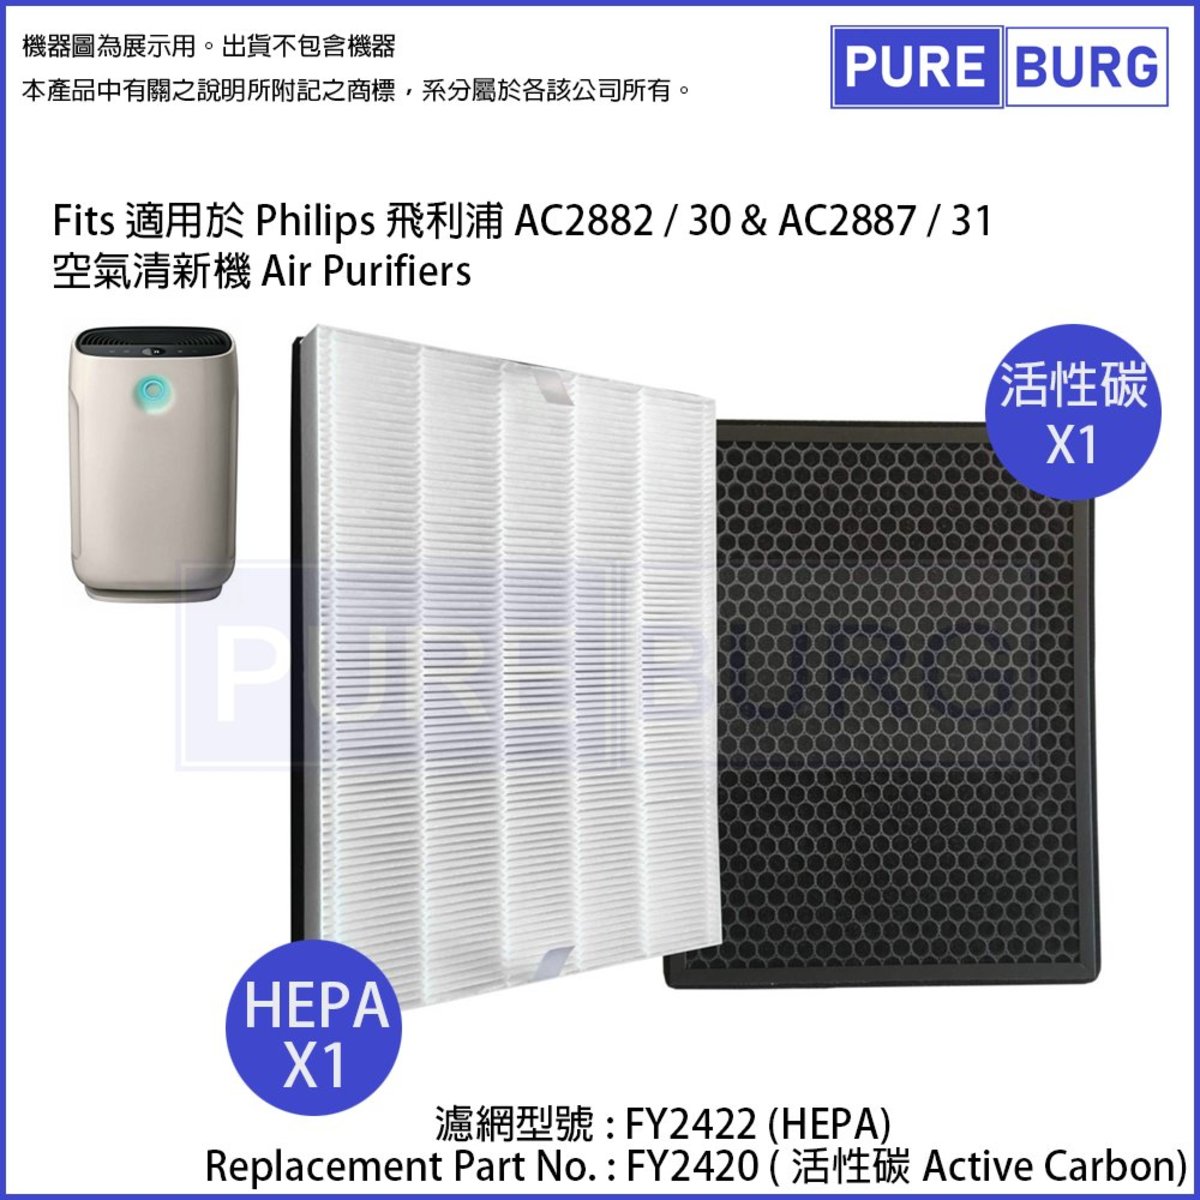 adjust strange Extensively Pureburg | Replacement 2-pack Filter Kit for Philips 2000 Series AC2882 /  30 & AC2887 / 31 Air Purifiers | HKTVmall The Largest HK Shopping Platform